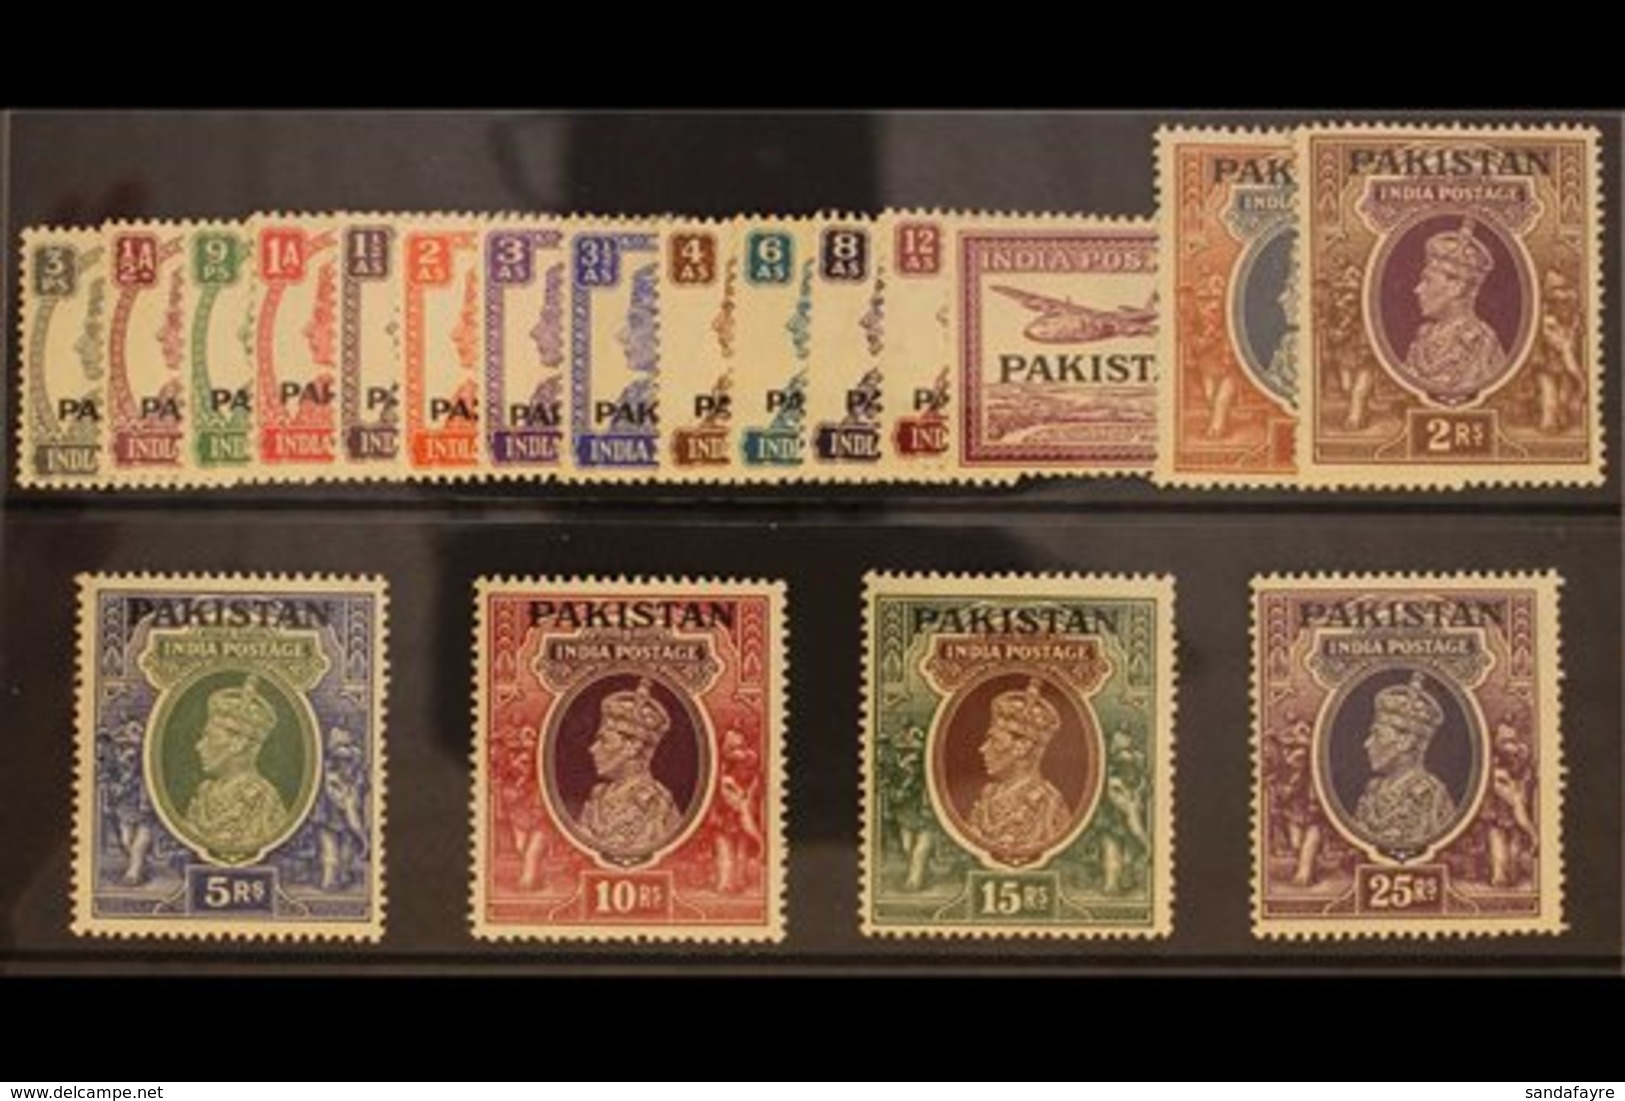 1947  KGVI Definitives Complete Set, SG 1/19, Never Hinged Mint. Fresh And Attractive! (19 Stamps) For More Images, Plea - Pakistan